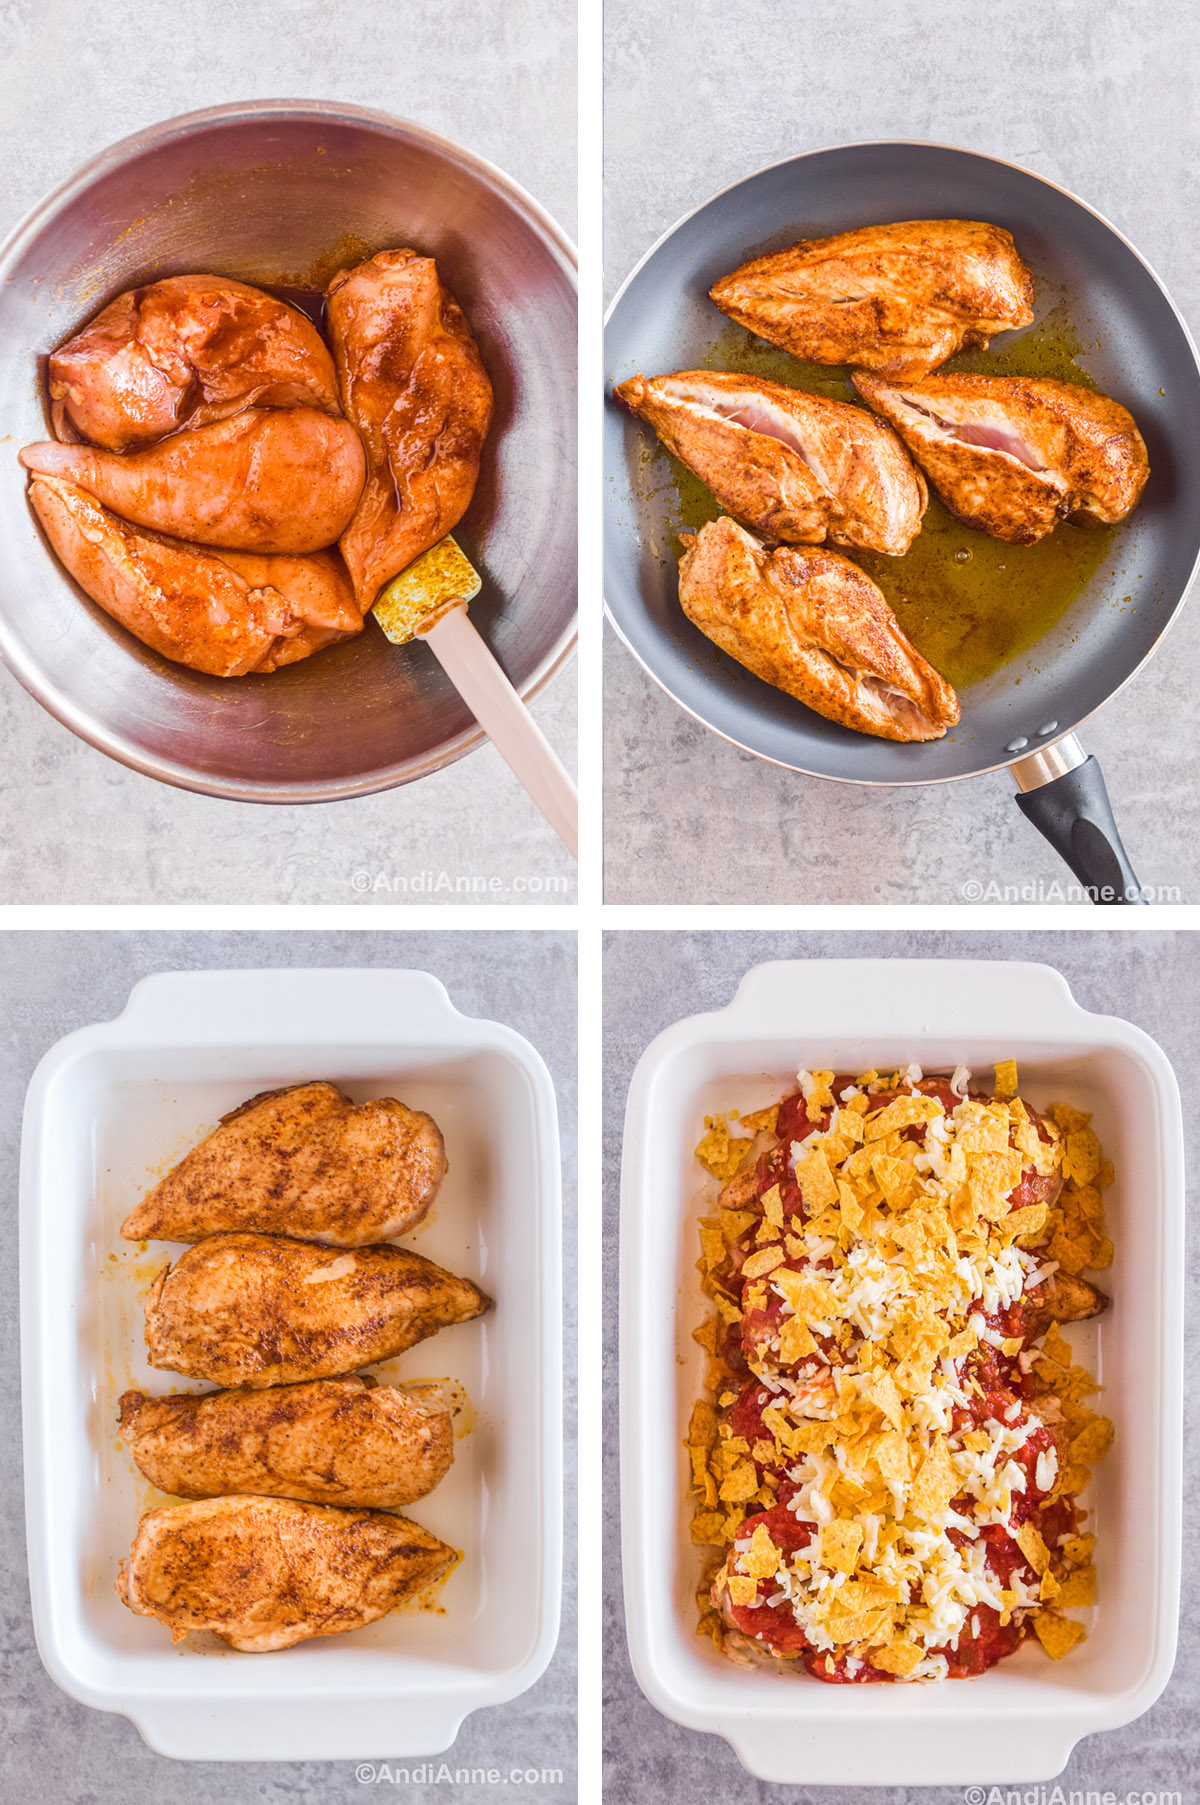 Four images showing steps to make the recipe including a steel bowl with raw chicken breasts coated in spices, a frying pan with seared chicken breasts, a white baking dish with four seared chicken breasts, and a baking dish with chicken breasts covered in salsa, mozzarella cheese and crushed tortilla chips.